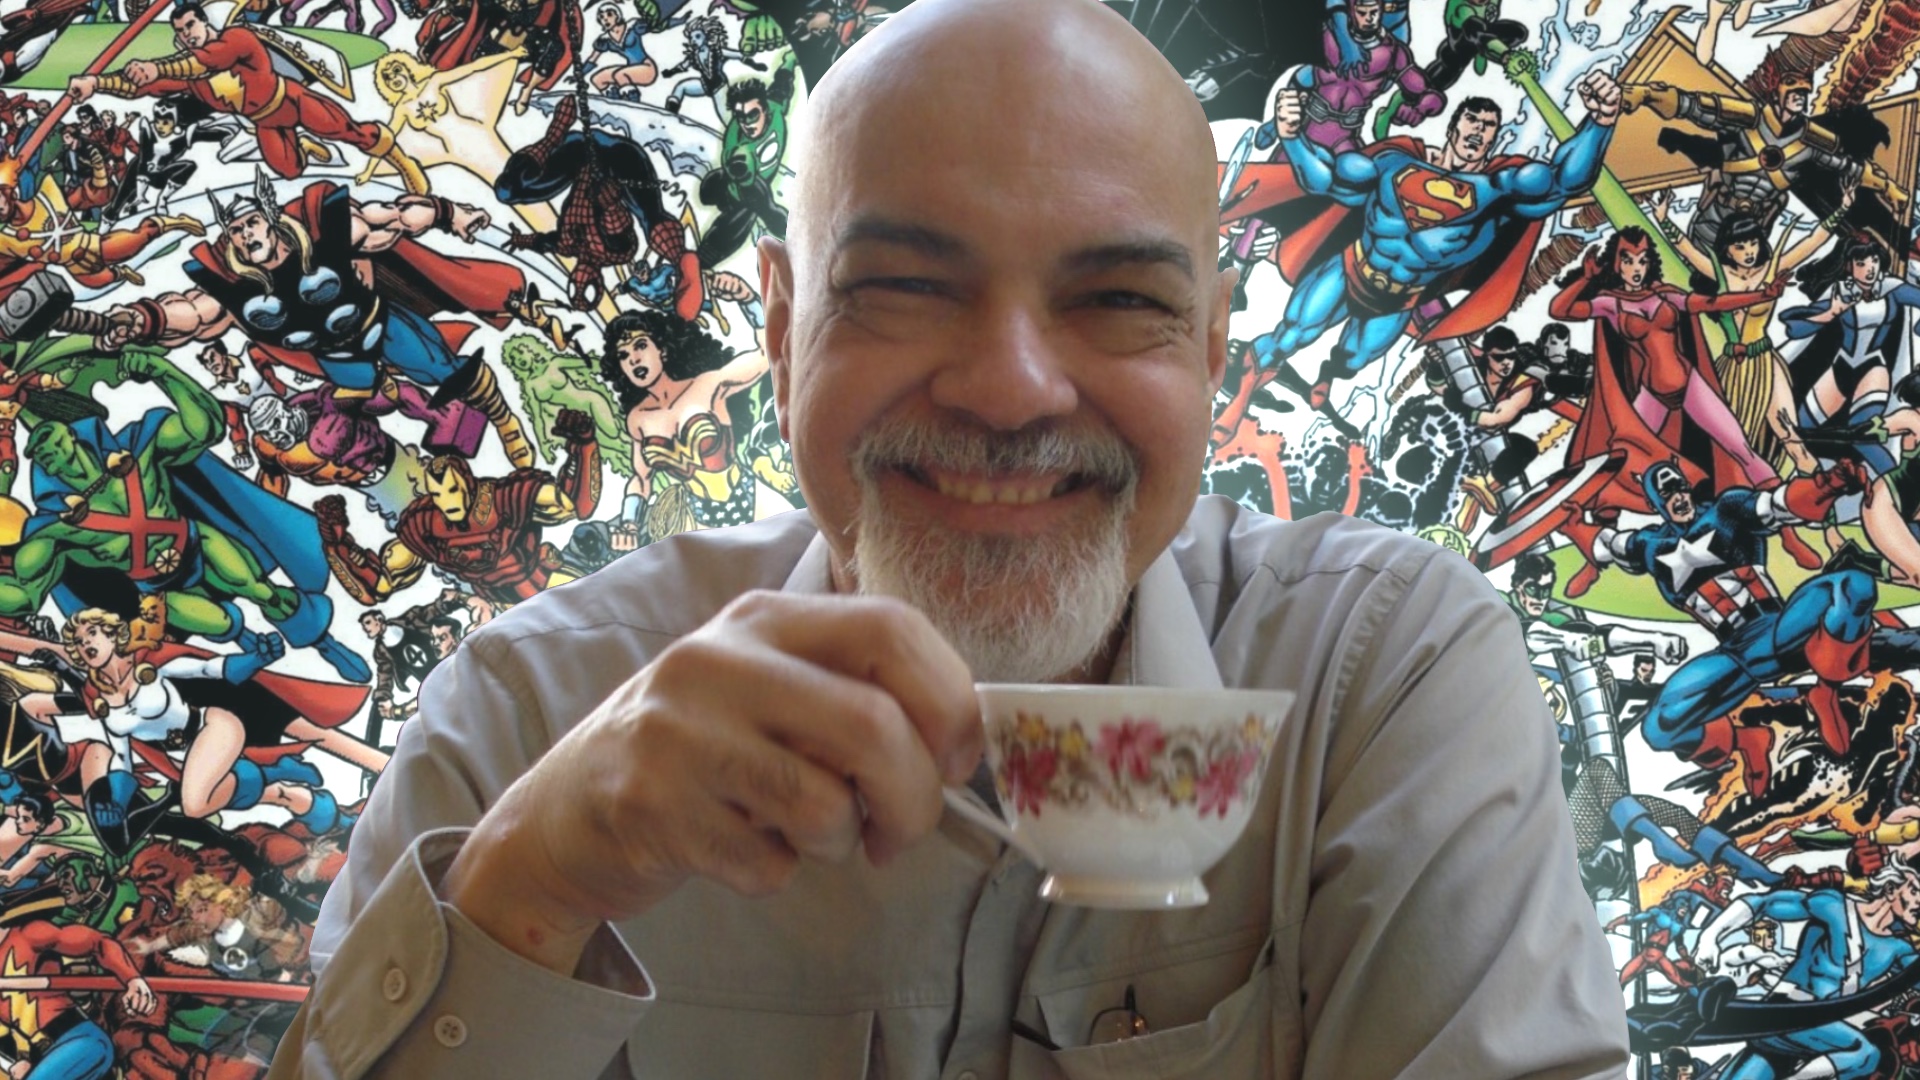 George Pérez photo courtesy the artist in a collage with art from JLA/Avengers